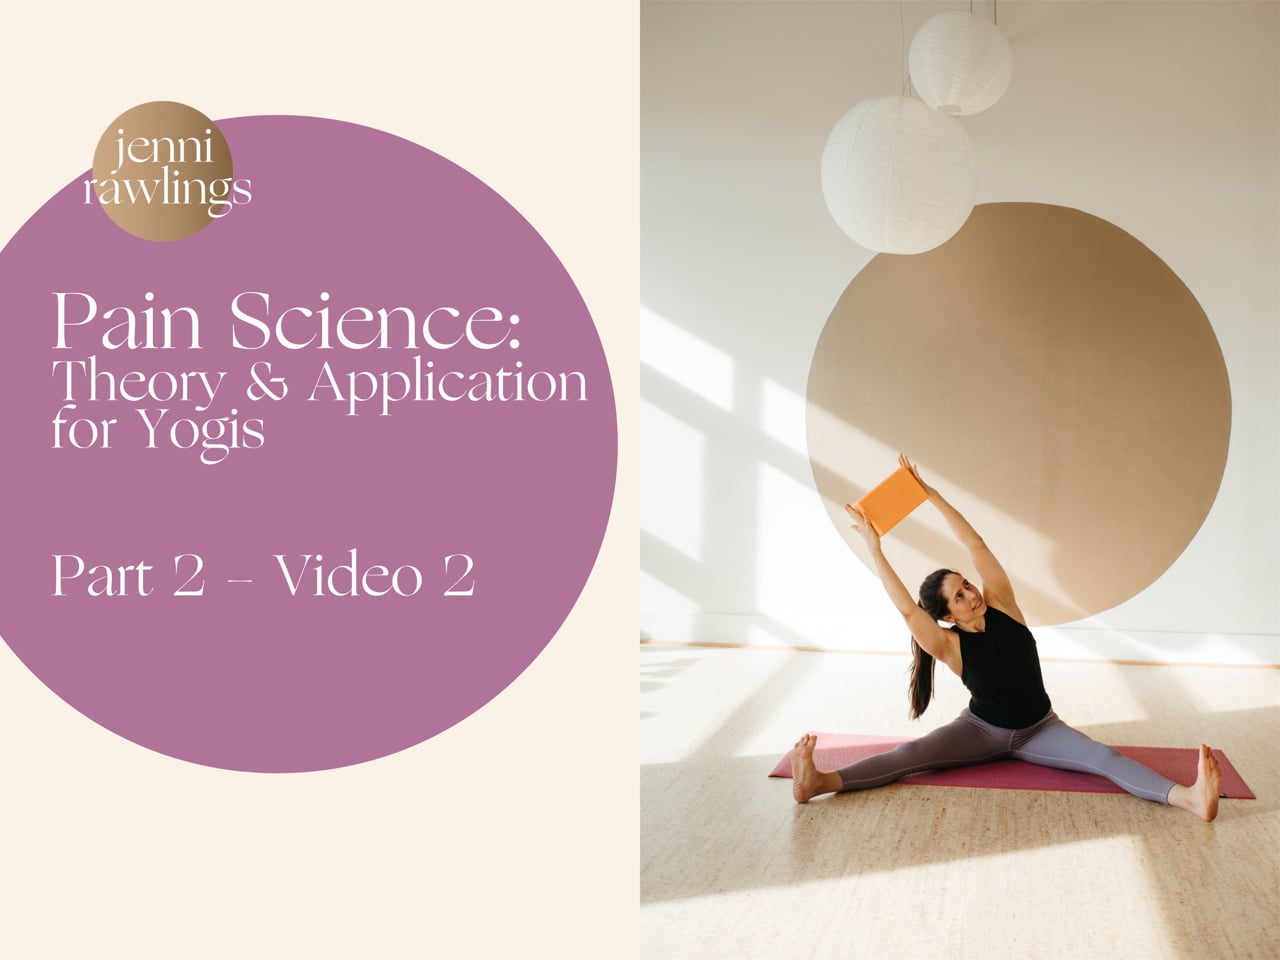 Pain Science for Yogis Part 2 - Video 2